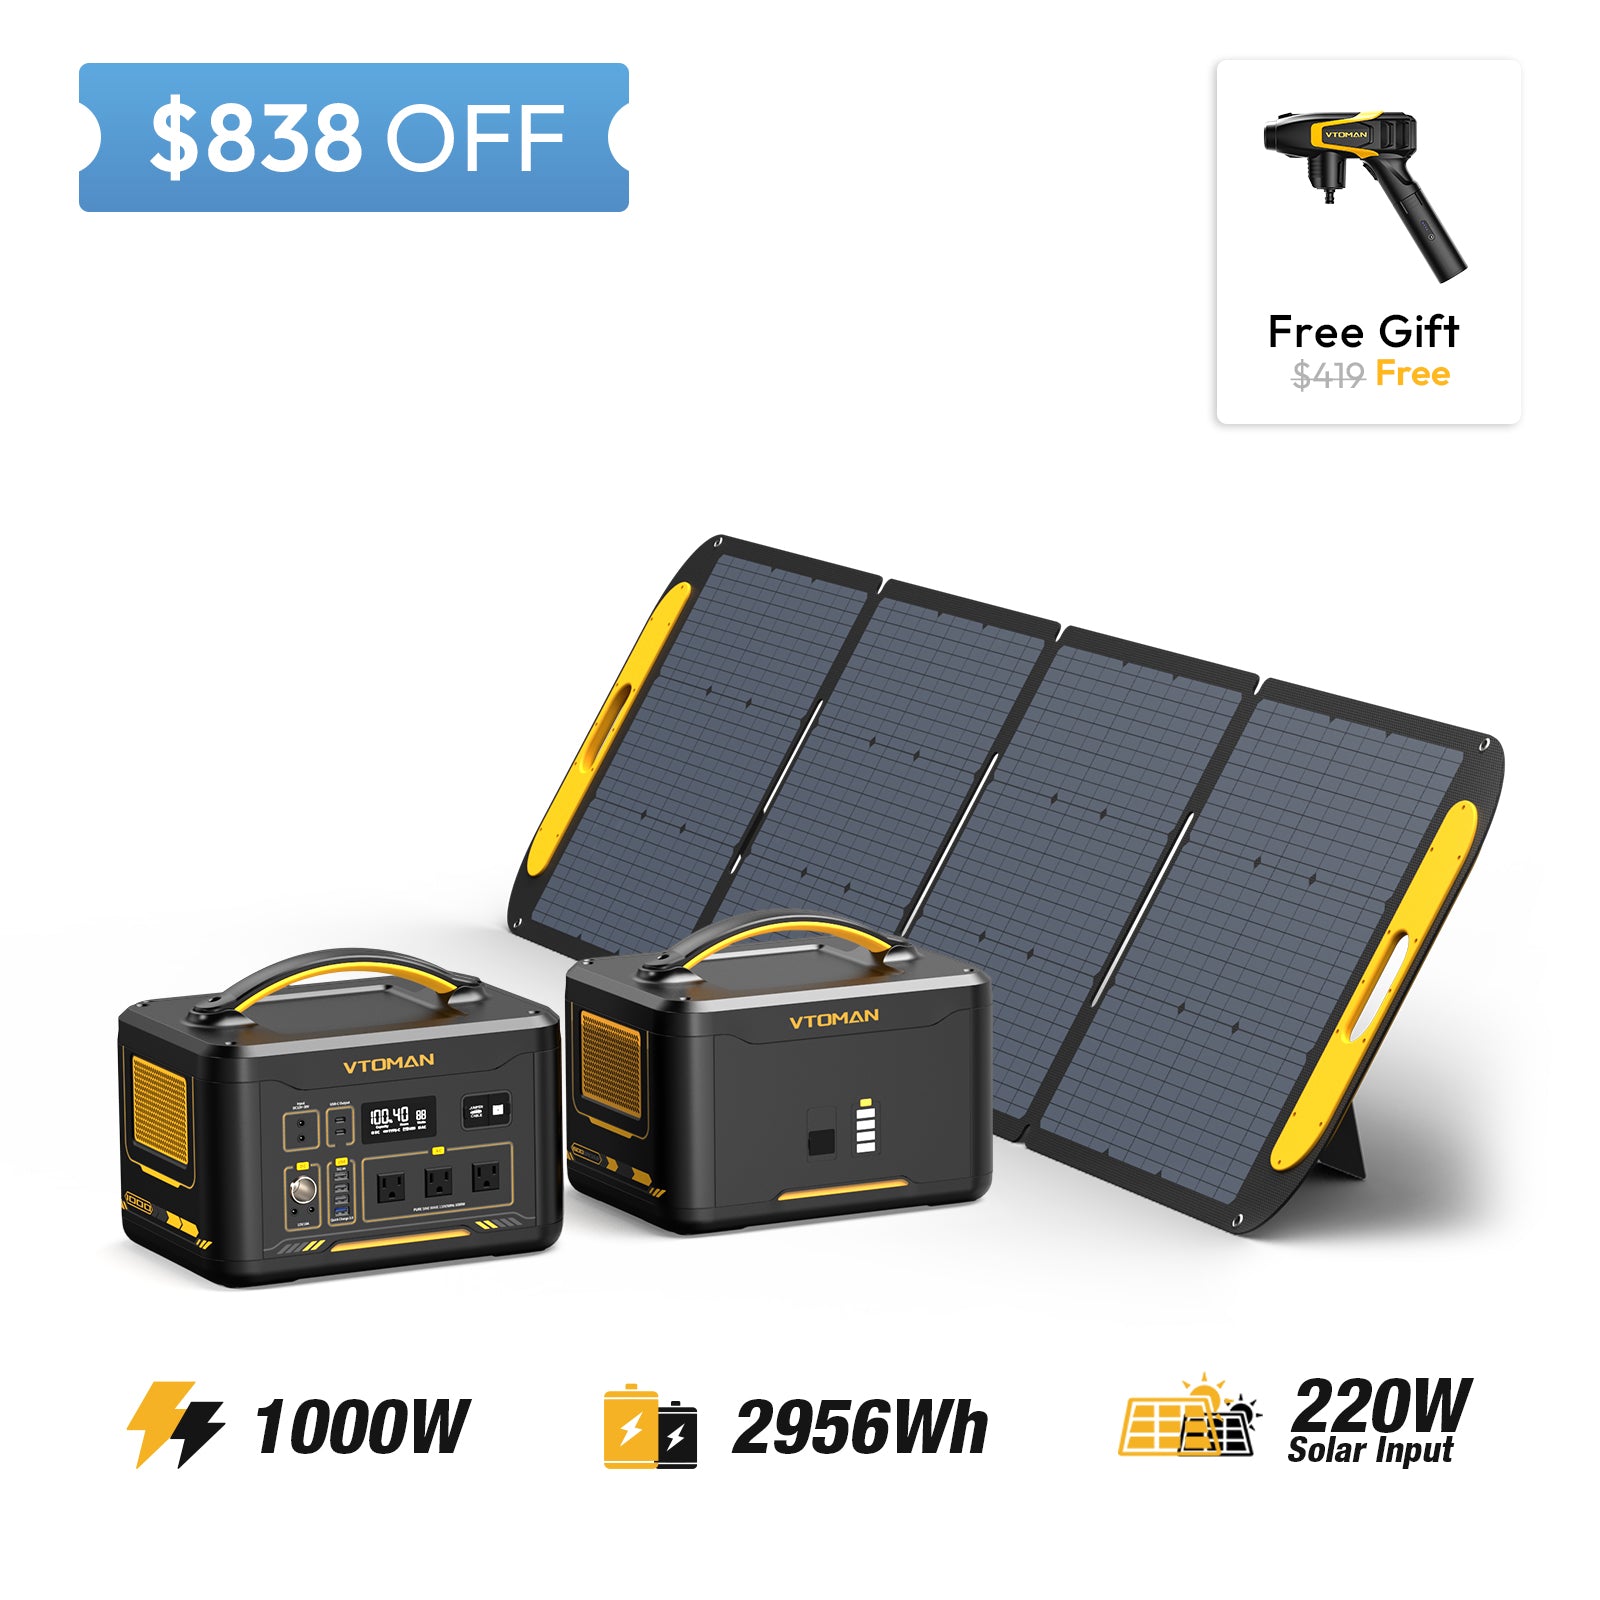 Jump 1000 and 1548wh extra battery and 220w solar panel save $828 in summer sale